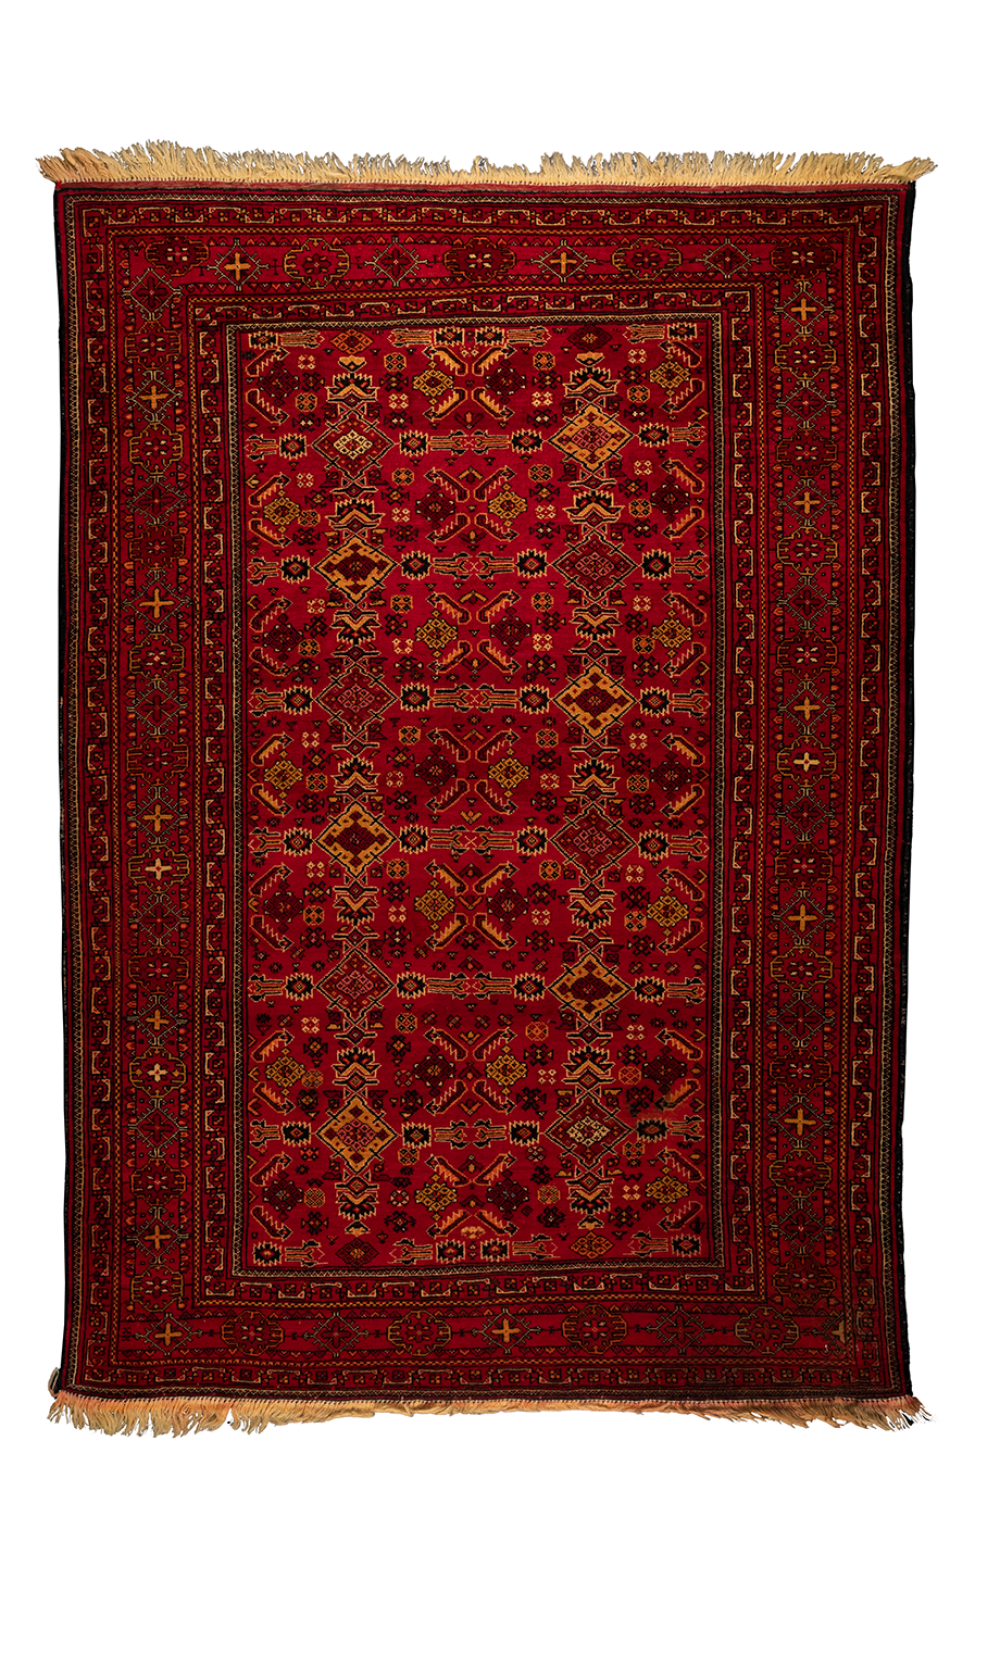 HANDMADE RUG IN WOOL & RED COLOR SISTAN AND BALUCHESTAN